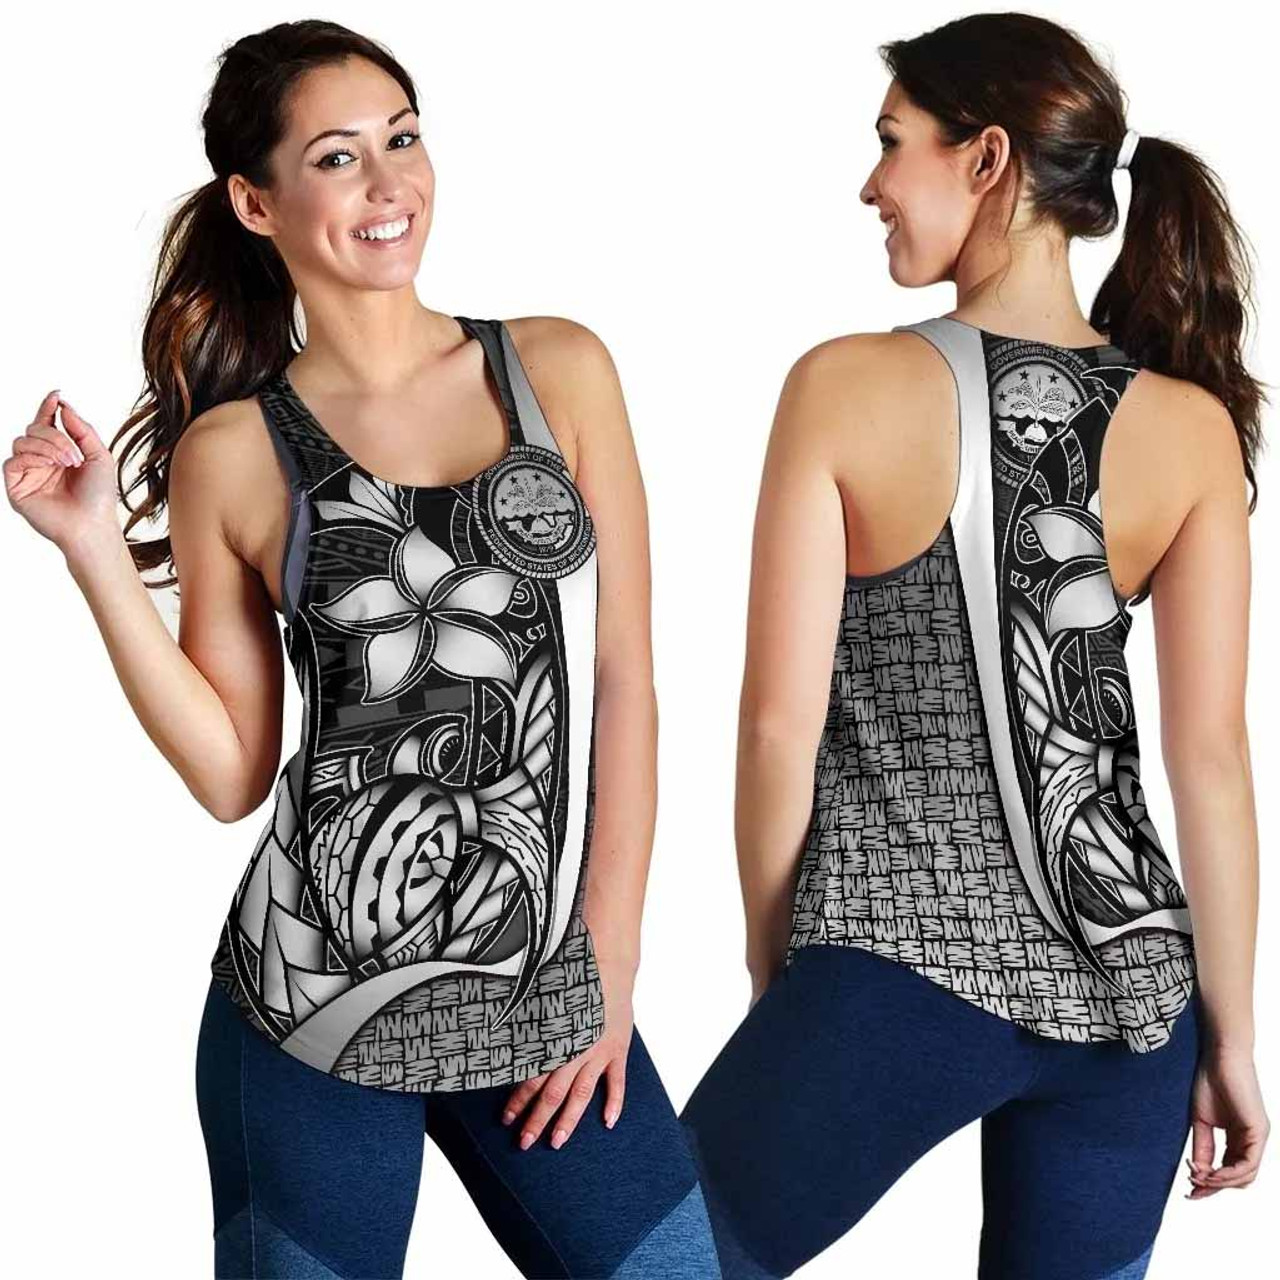 Federated States of Micronesia Women Racerback Tank White - Turtle With Hook 1